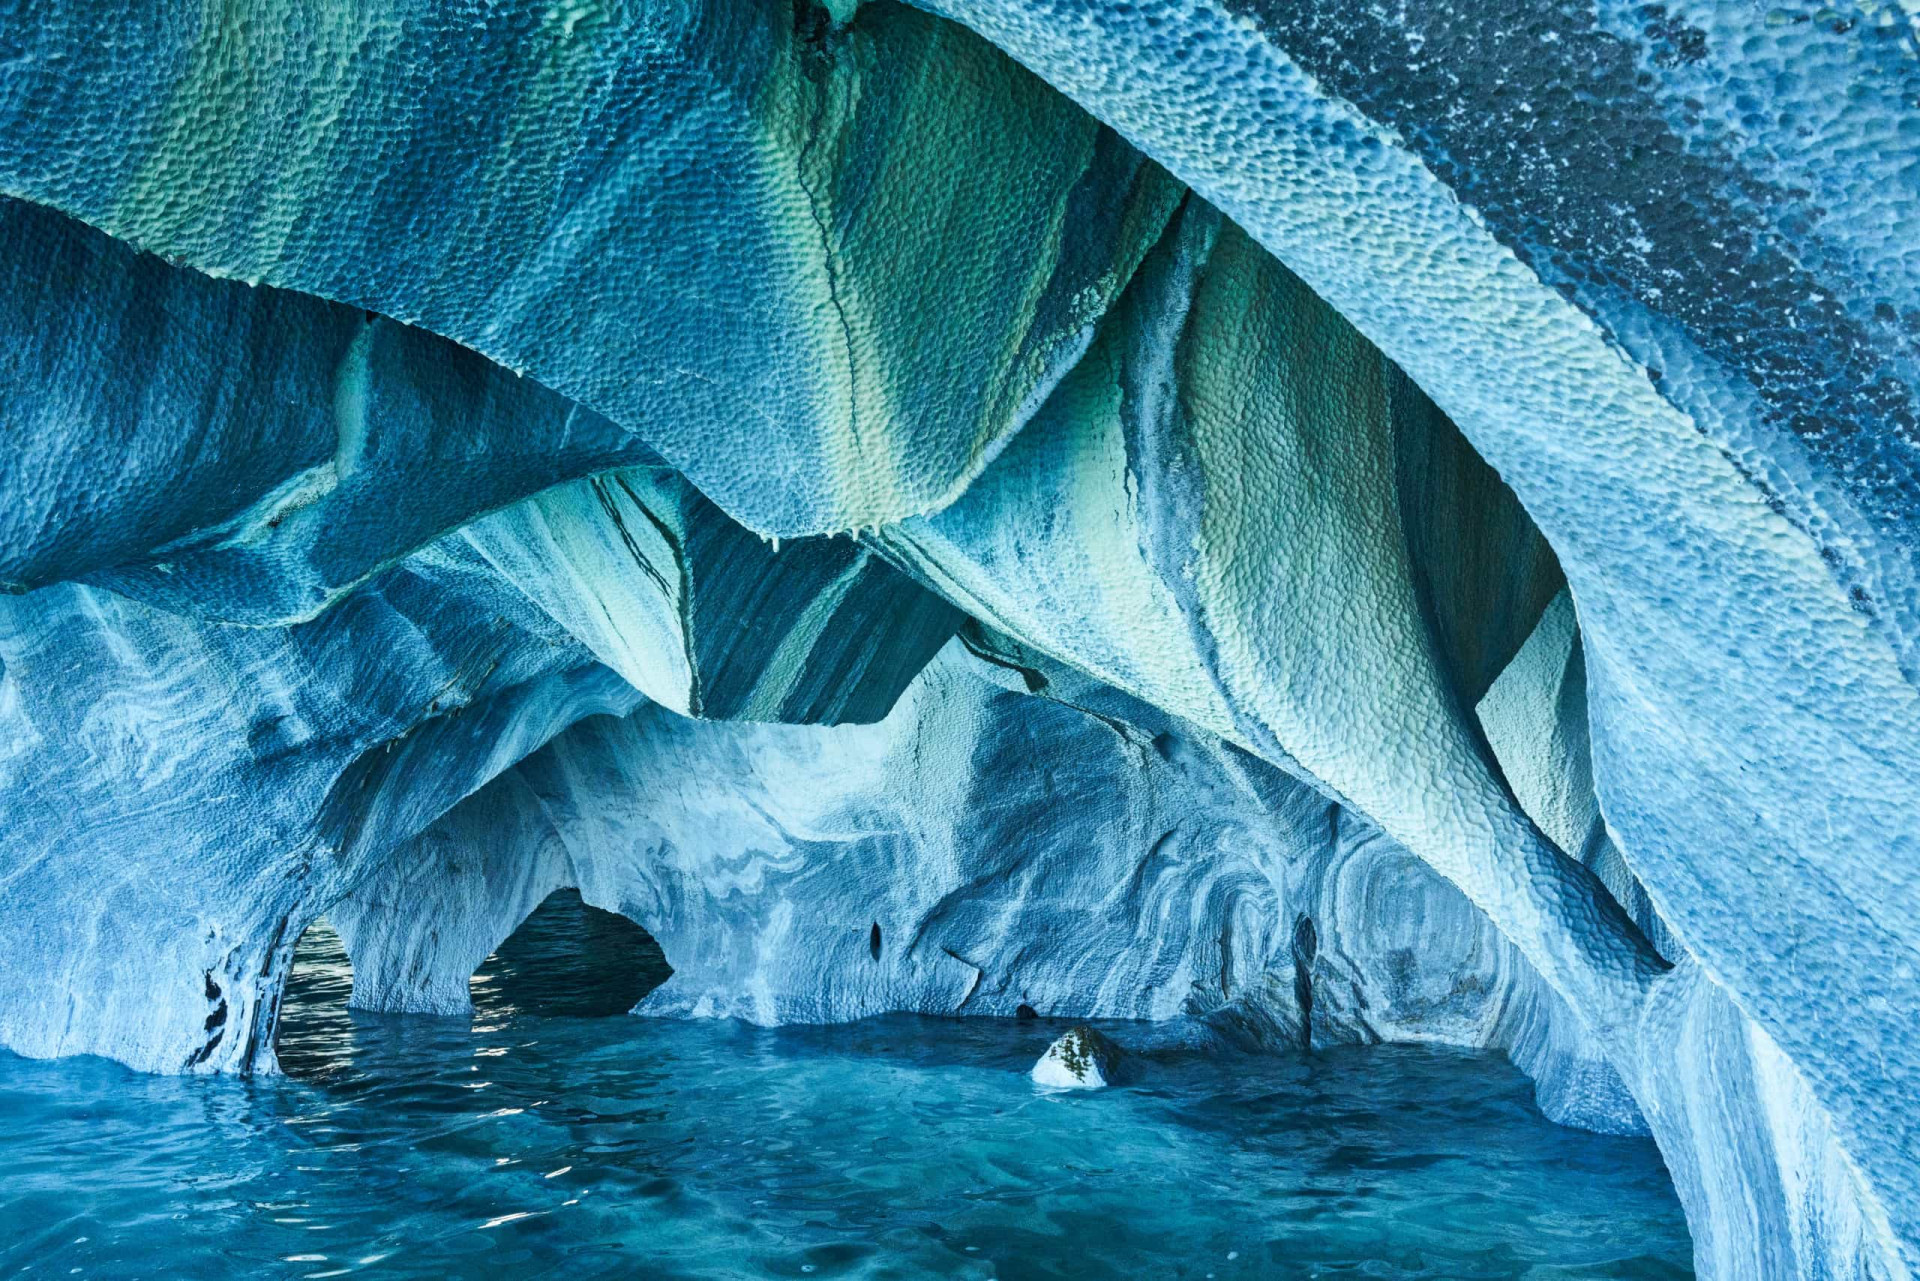 General Carrera Lake (also known as Lake Buenos Aires) is home to these glorious mineral formations. The blue marble has been eroded by the water to form dazzling ceilings fit for a cathedral.<p><a href="https://www.msn.com/en-us/community/channel/vid-7xx8mnucu55yw63we9va2gwr7uihbxwc68fxqp25x6tg4ftibpra?cvid=94631541bc0f4f89bfd59158d696ad7e">Follow us and access great exclusive content every day</a></p>